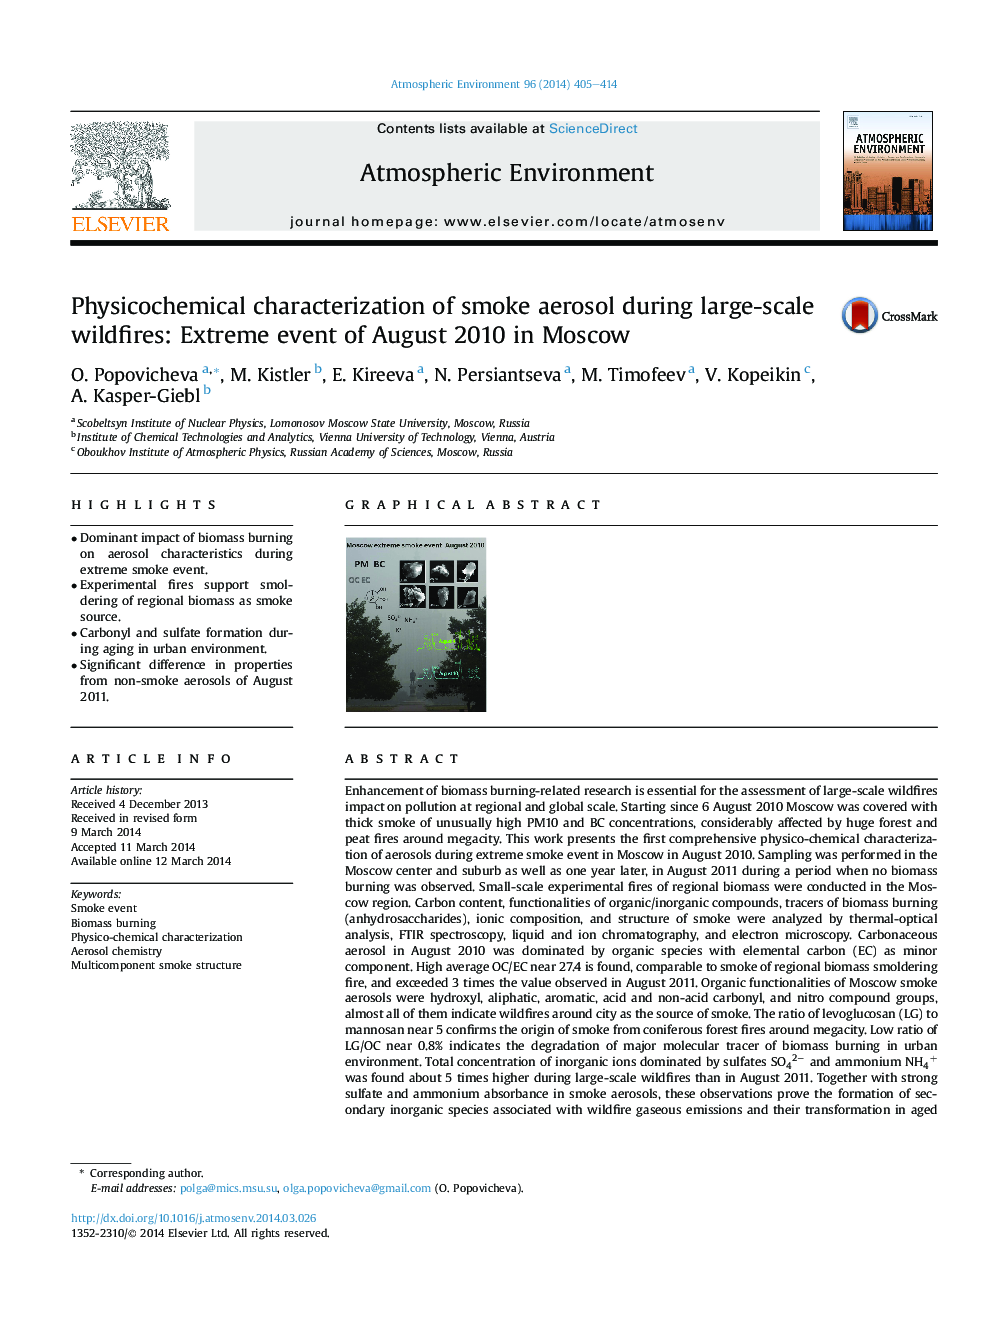 Physicochemical characterization of smoke aerosol during large-scale wildfires: Extreme event of August 2010 in Moscow